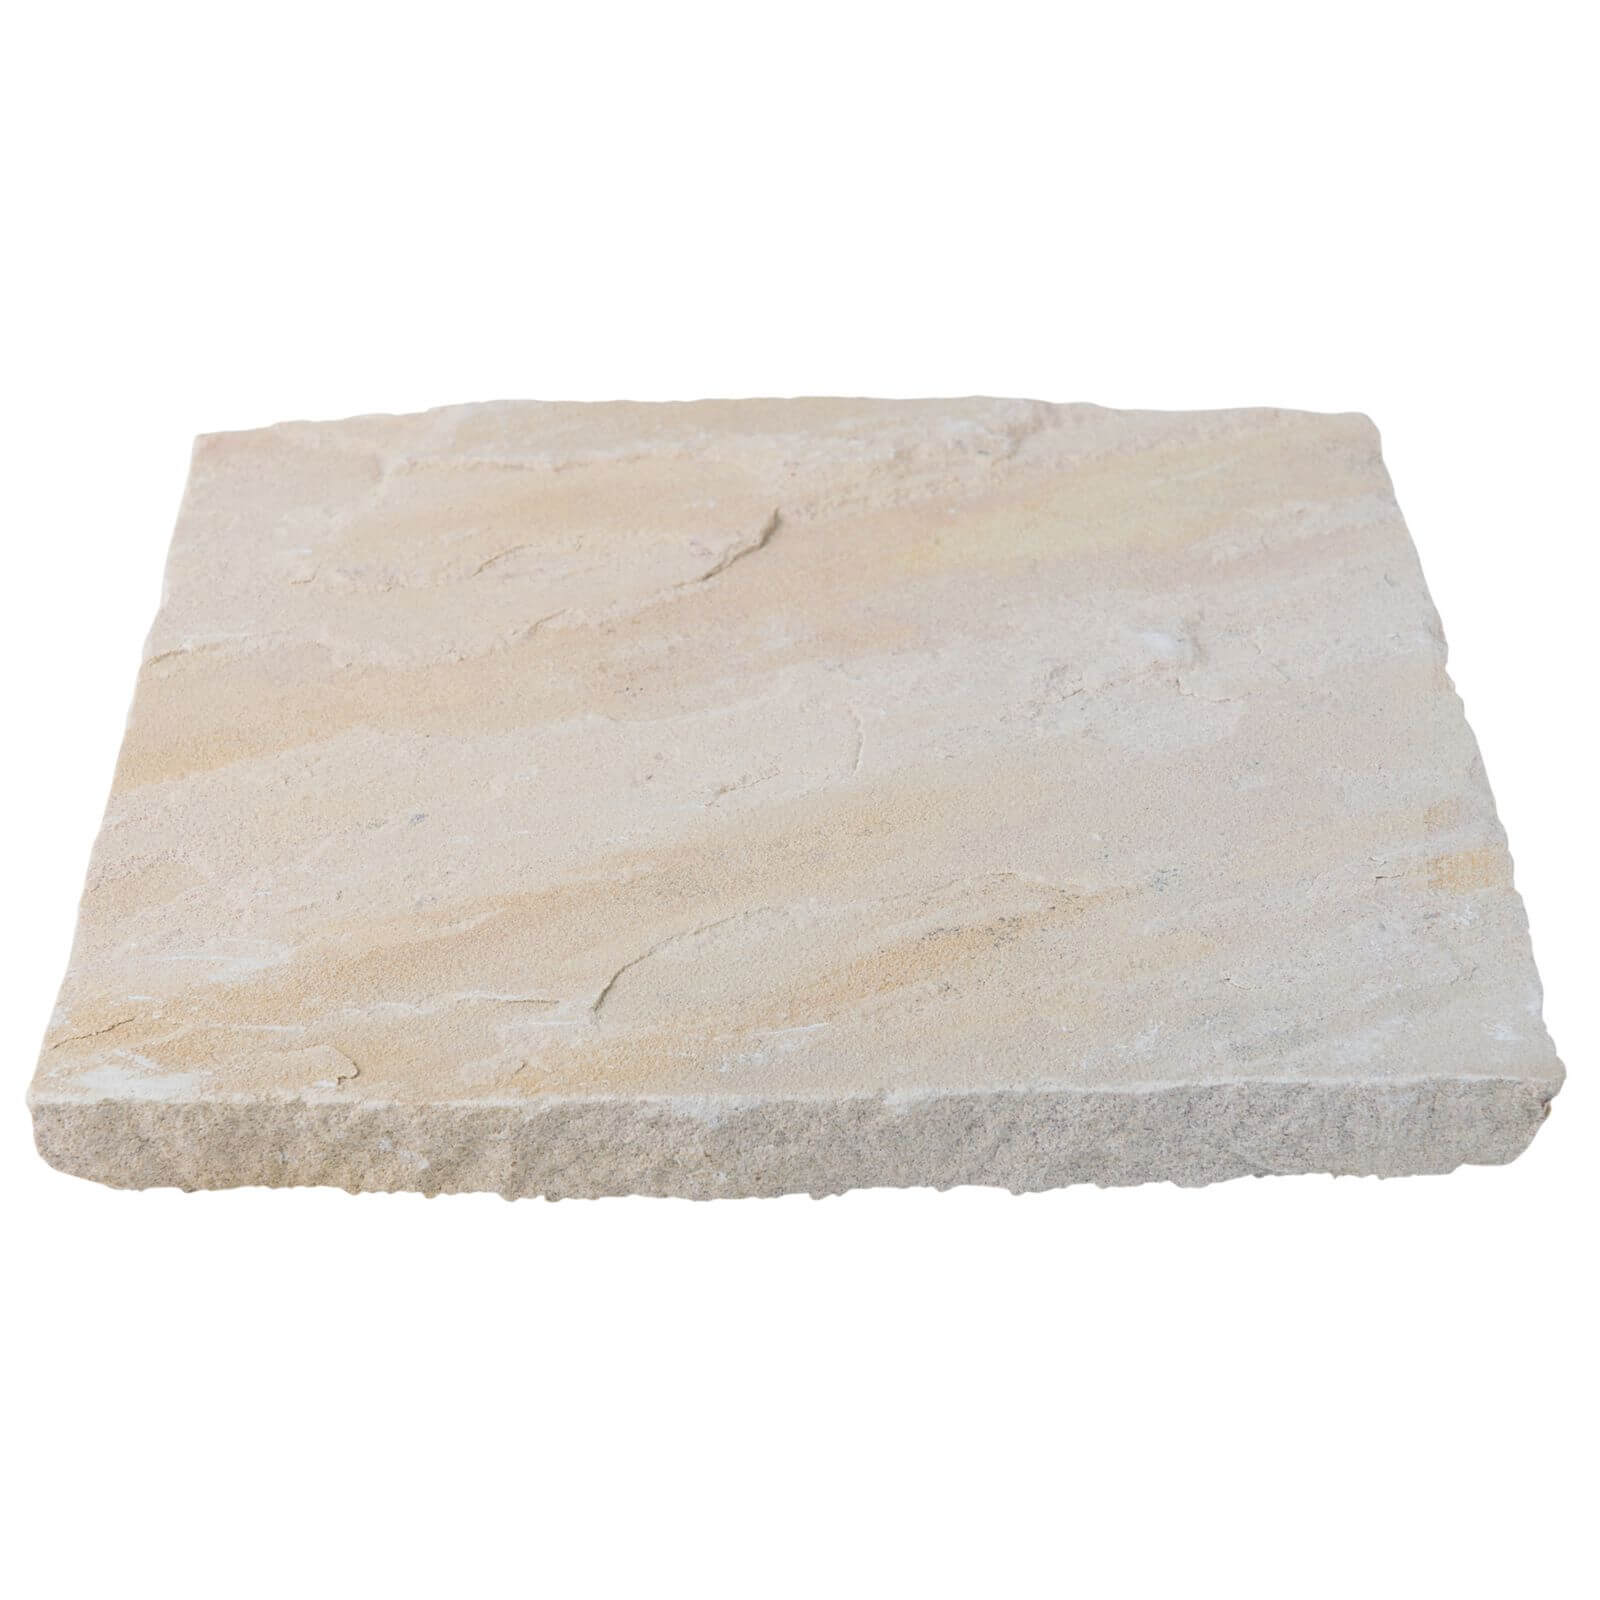 Stylish Stone Natural Sandstone 10.2sq m Eastern Sand - Full Pack of 46 Mixed Slabs